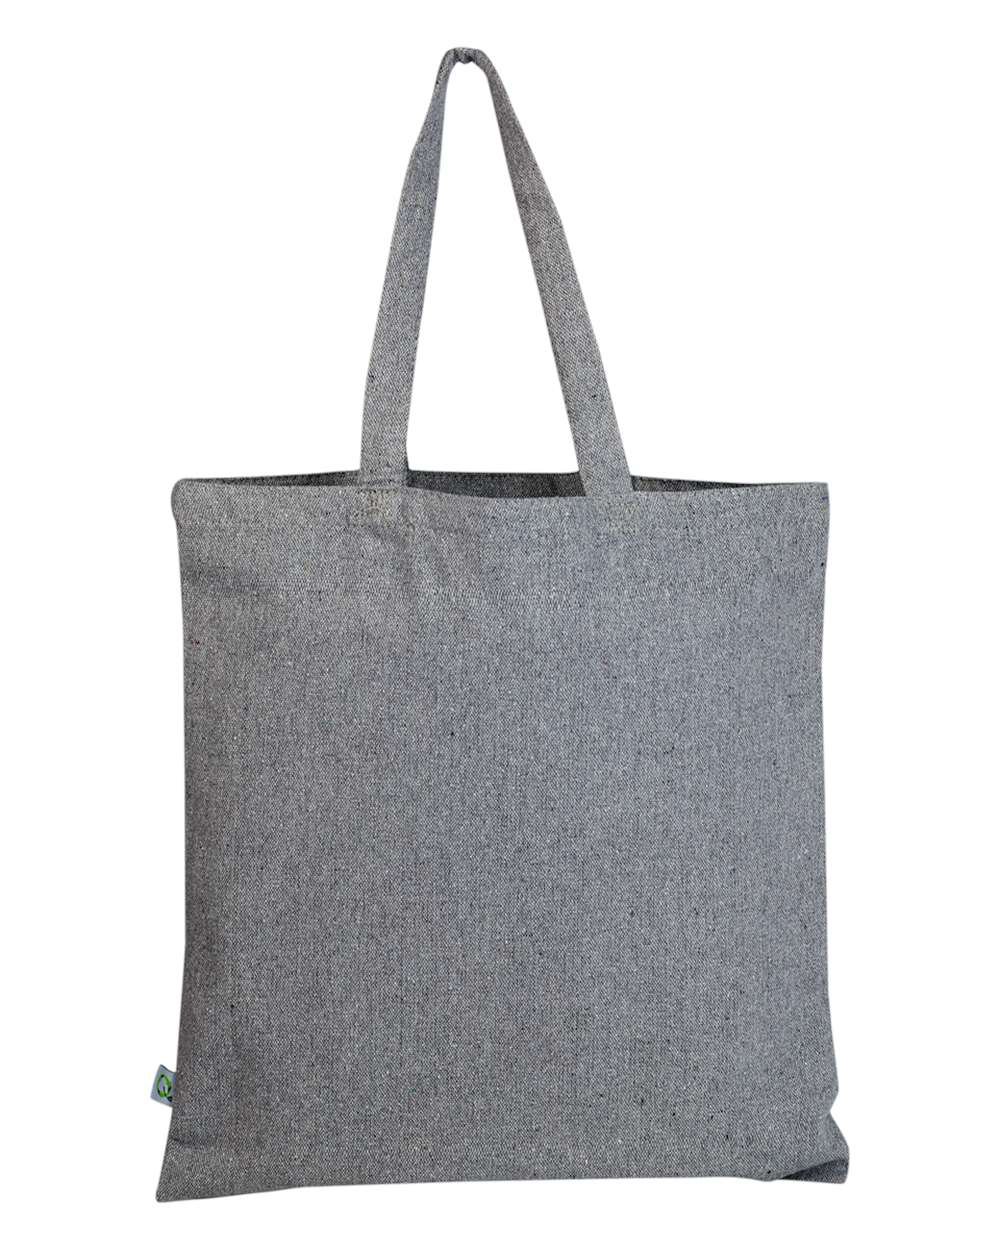 OAD Recycled cotton tote